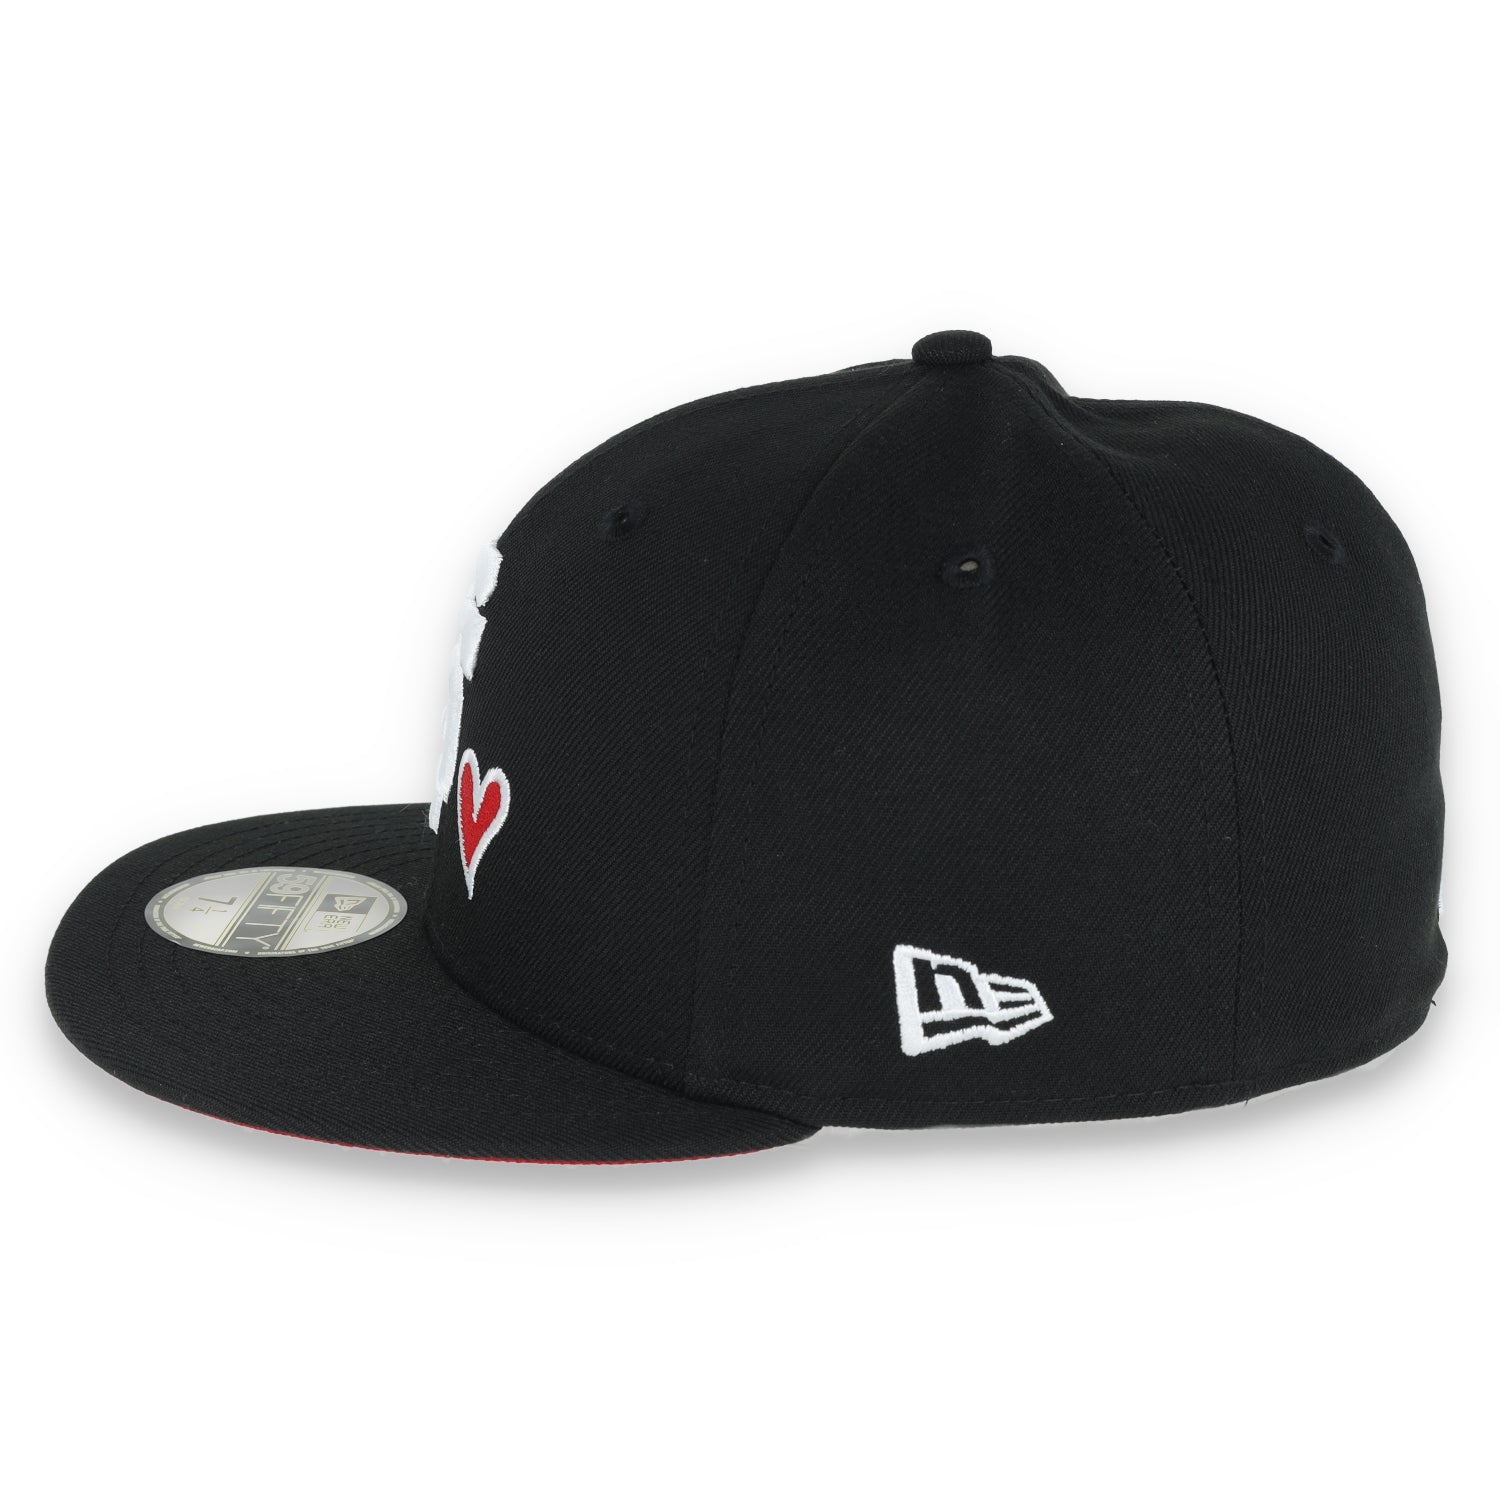 New Era San Francisco Giants 2012 World Series Red Heart Side Patch 59FIFTY Fitted-Black/Red